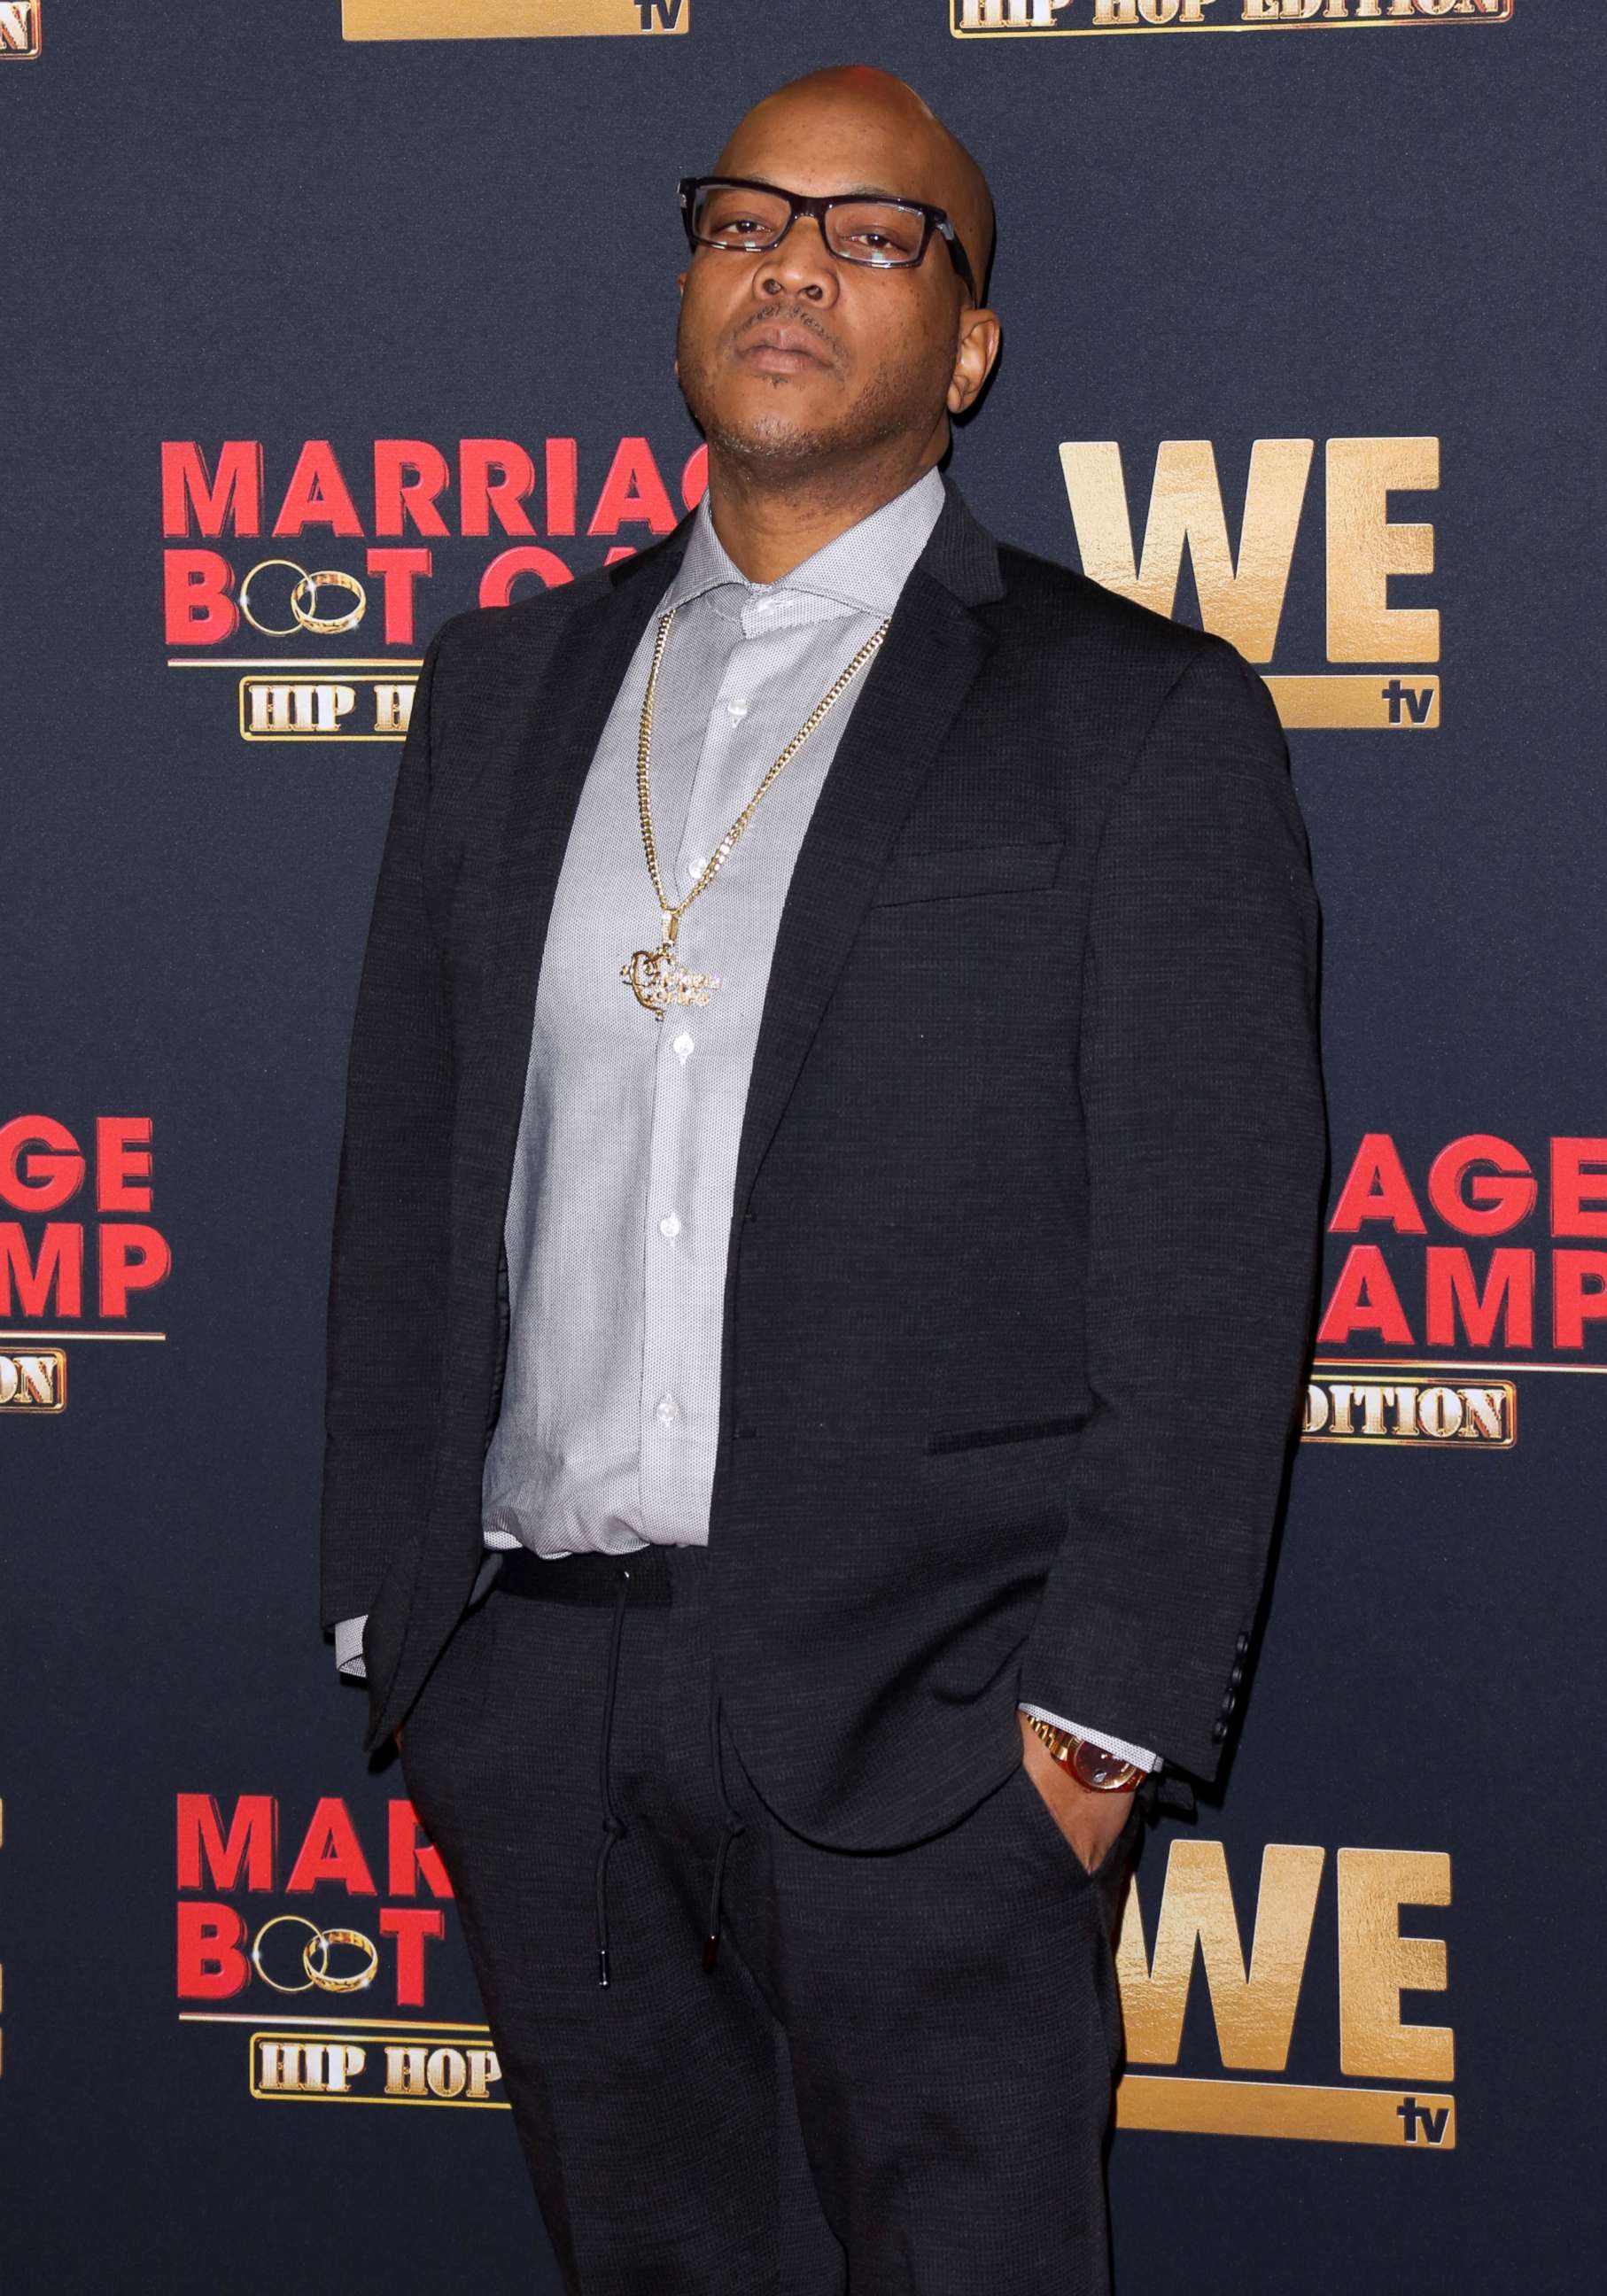 PHOTO: Rapper Styles P attends the premiere of WE TV's "Marriage Boot Camp: Hip Hop Edition" at Liaison Restaurant, Feb. 4, 2020, in Los Angeles.